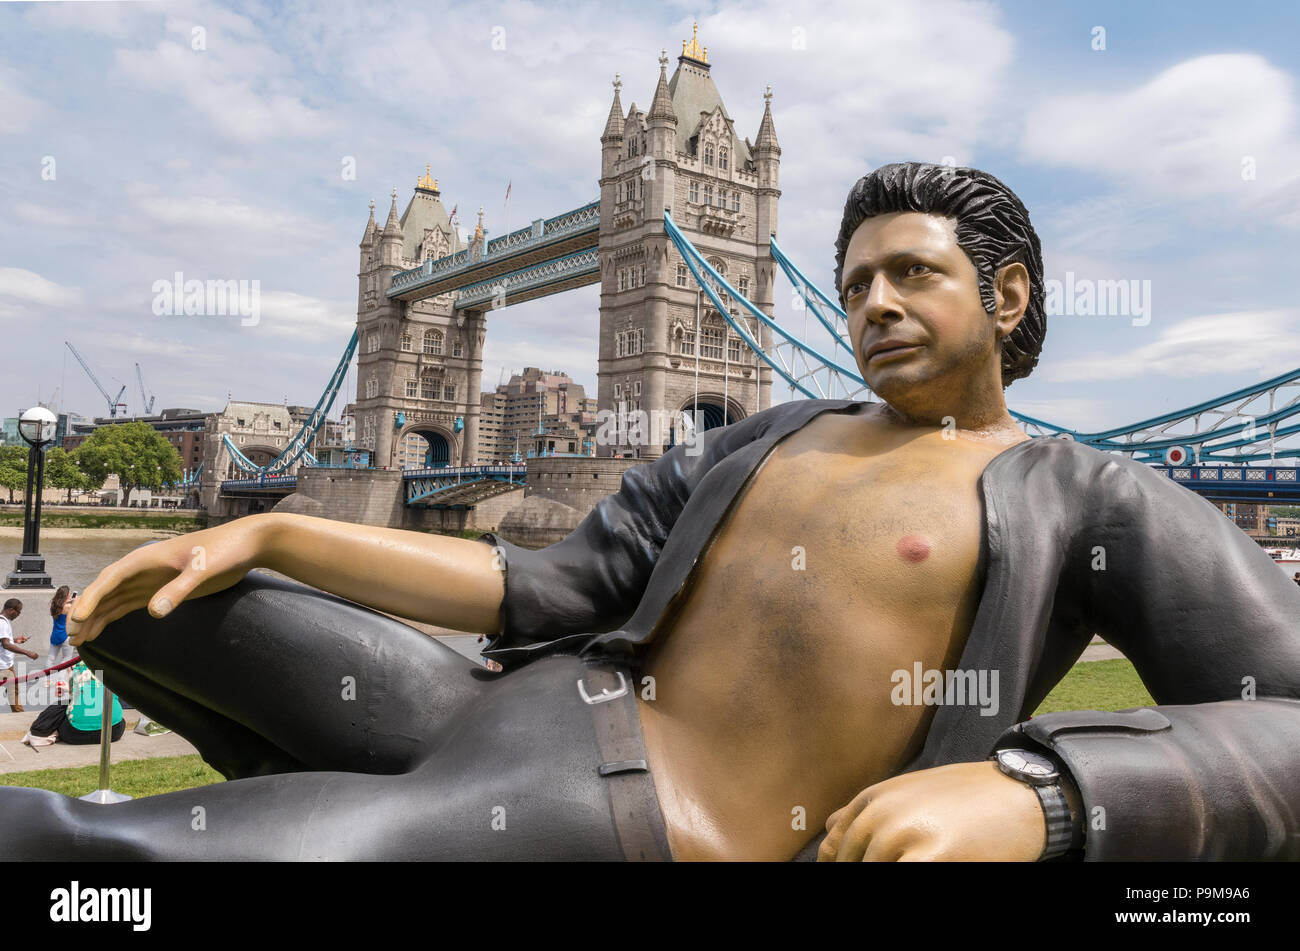 London, UK. 19th July, 2018. More london riverside, London, UK. A huge model of Jeff Goldblum looks over the city of London and London bridge to promote the new movie Jurassic world, fallen kingdom on a hot summers day in the continuing heatwave. Movie star Jeff Goldblum huge model at more london place attracts admirers and fans of the film to the summer by the river festival next to city hall and tower bridge. Credit: Steve Hawkins Photography/Alamy Live News Stock Photo